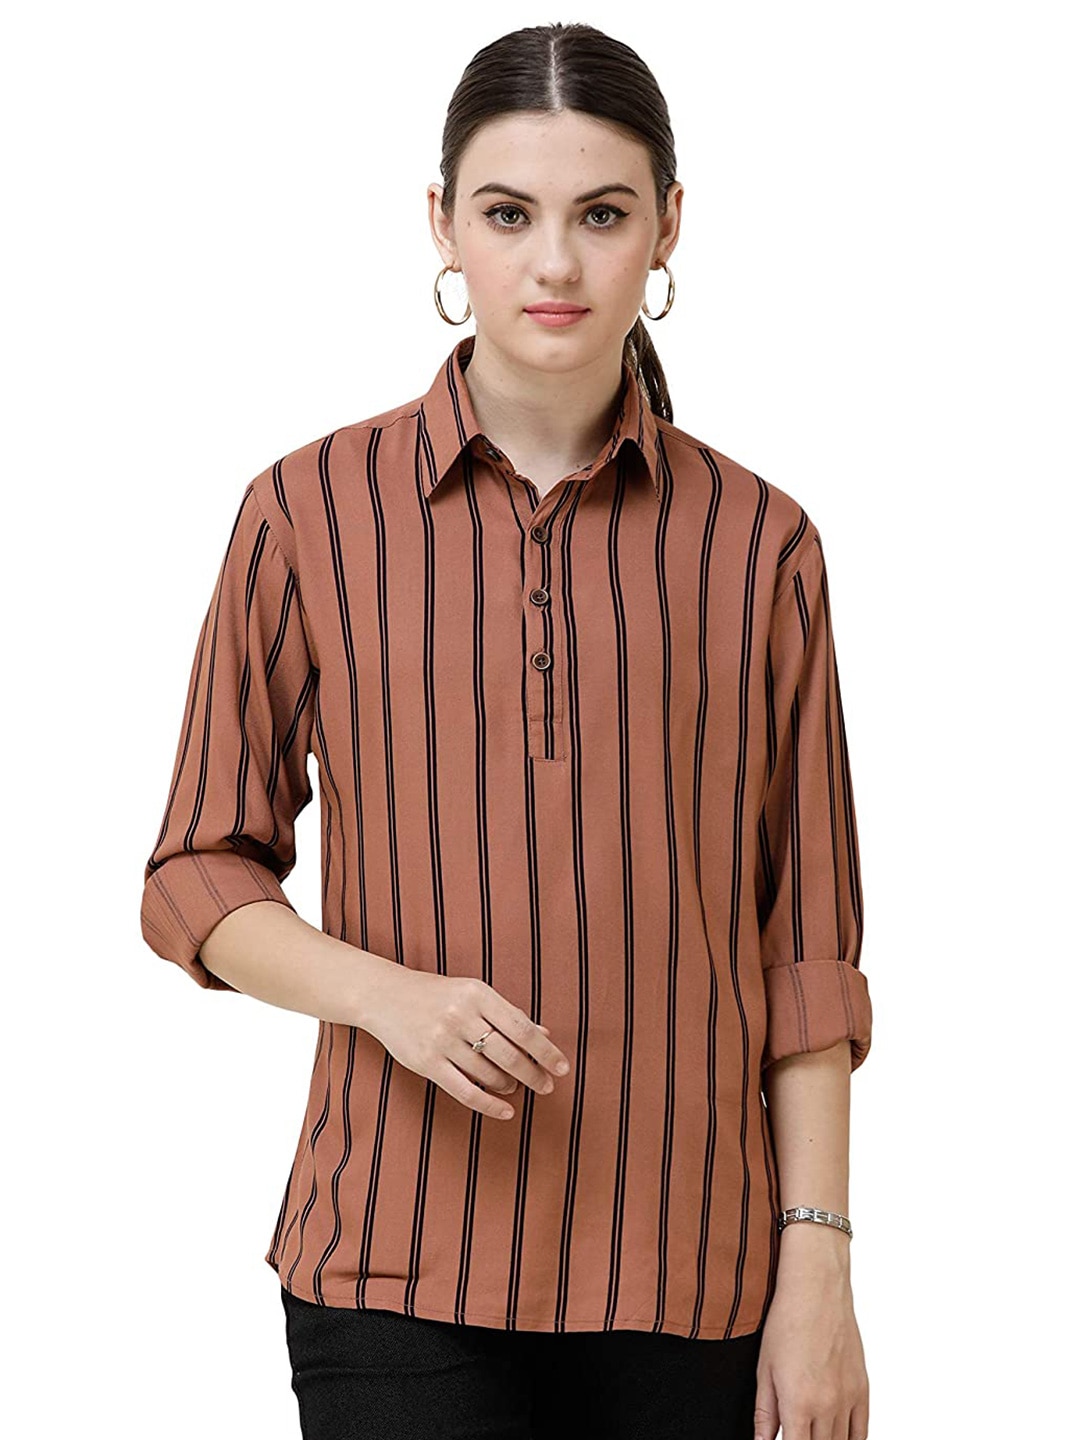 DECHEN Women Brown Striped Roll-Up Sleeves Shirt Style Top Price in India